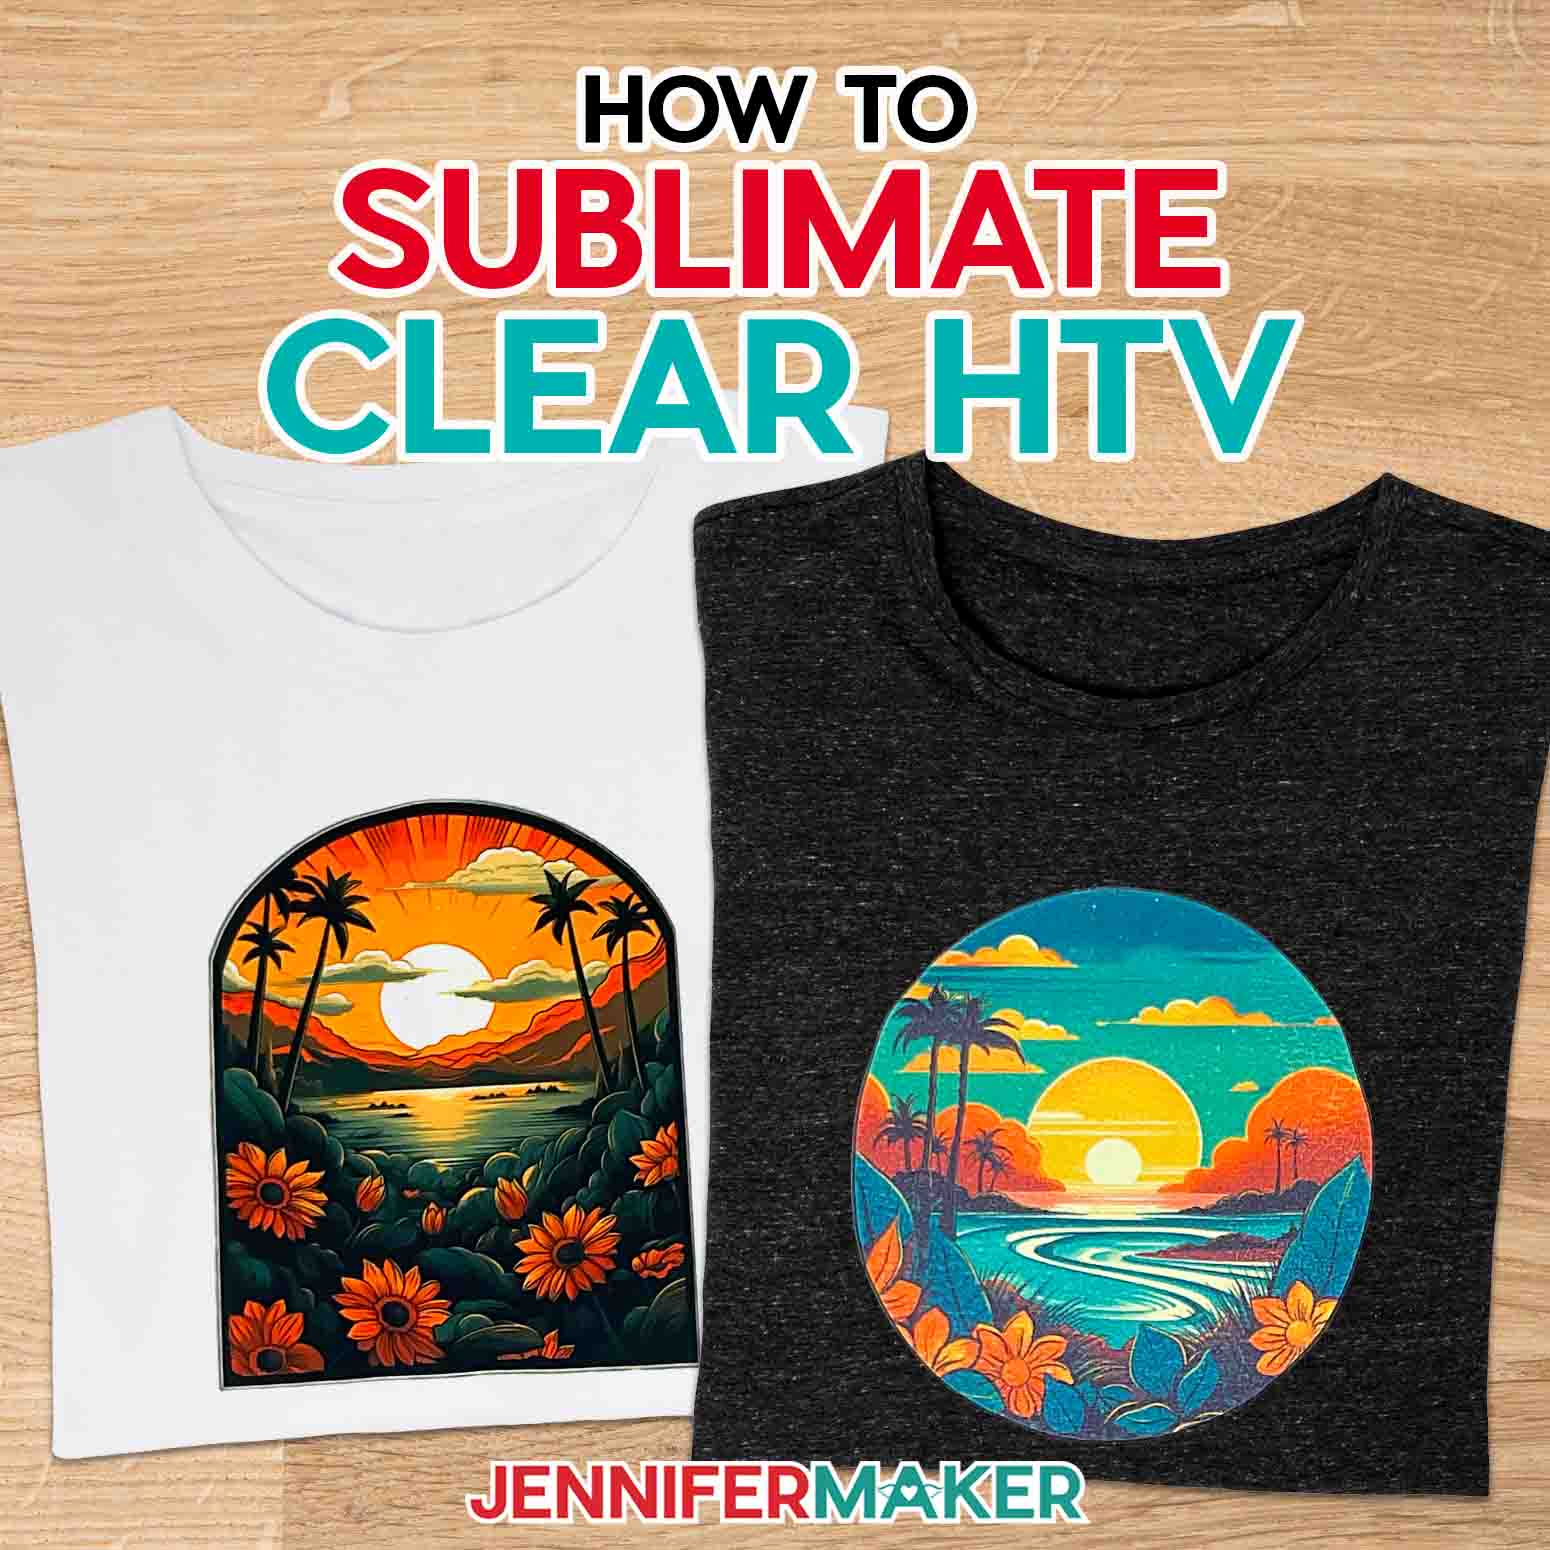 Learn how to sublimate on clear HTV with Jennifer Maker's new tutorial! Two t-shirts, one white and one a dark gray heather, both with brightly colored sunset designs sublimated onto the fronts.